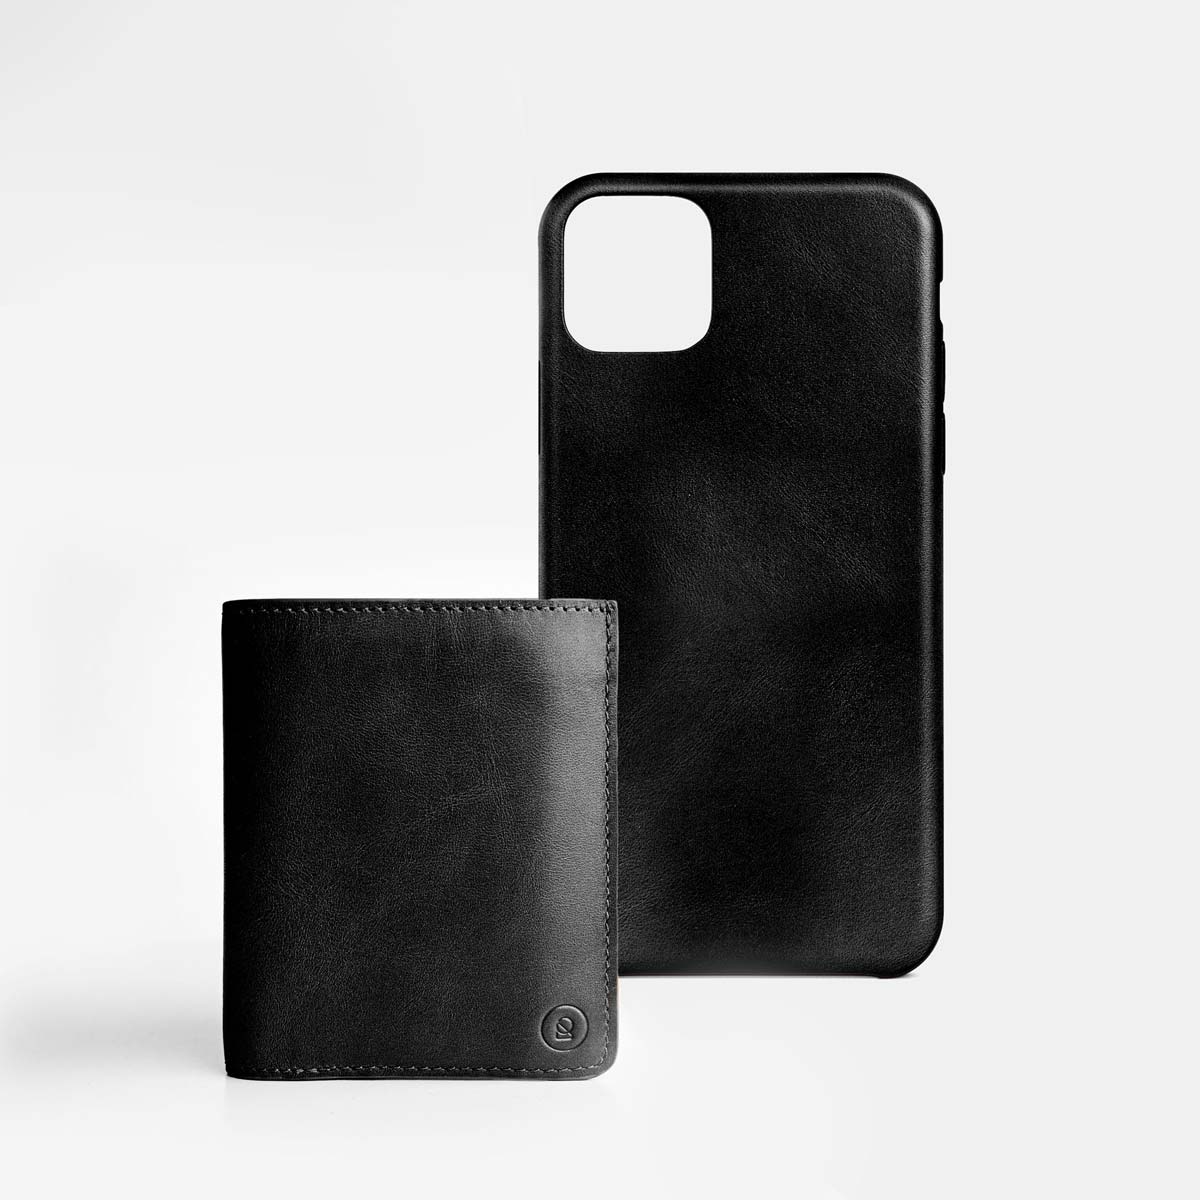 Leather iPhone Xs Max Shell Case - Black - RYAN London